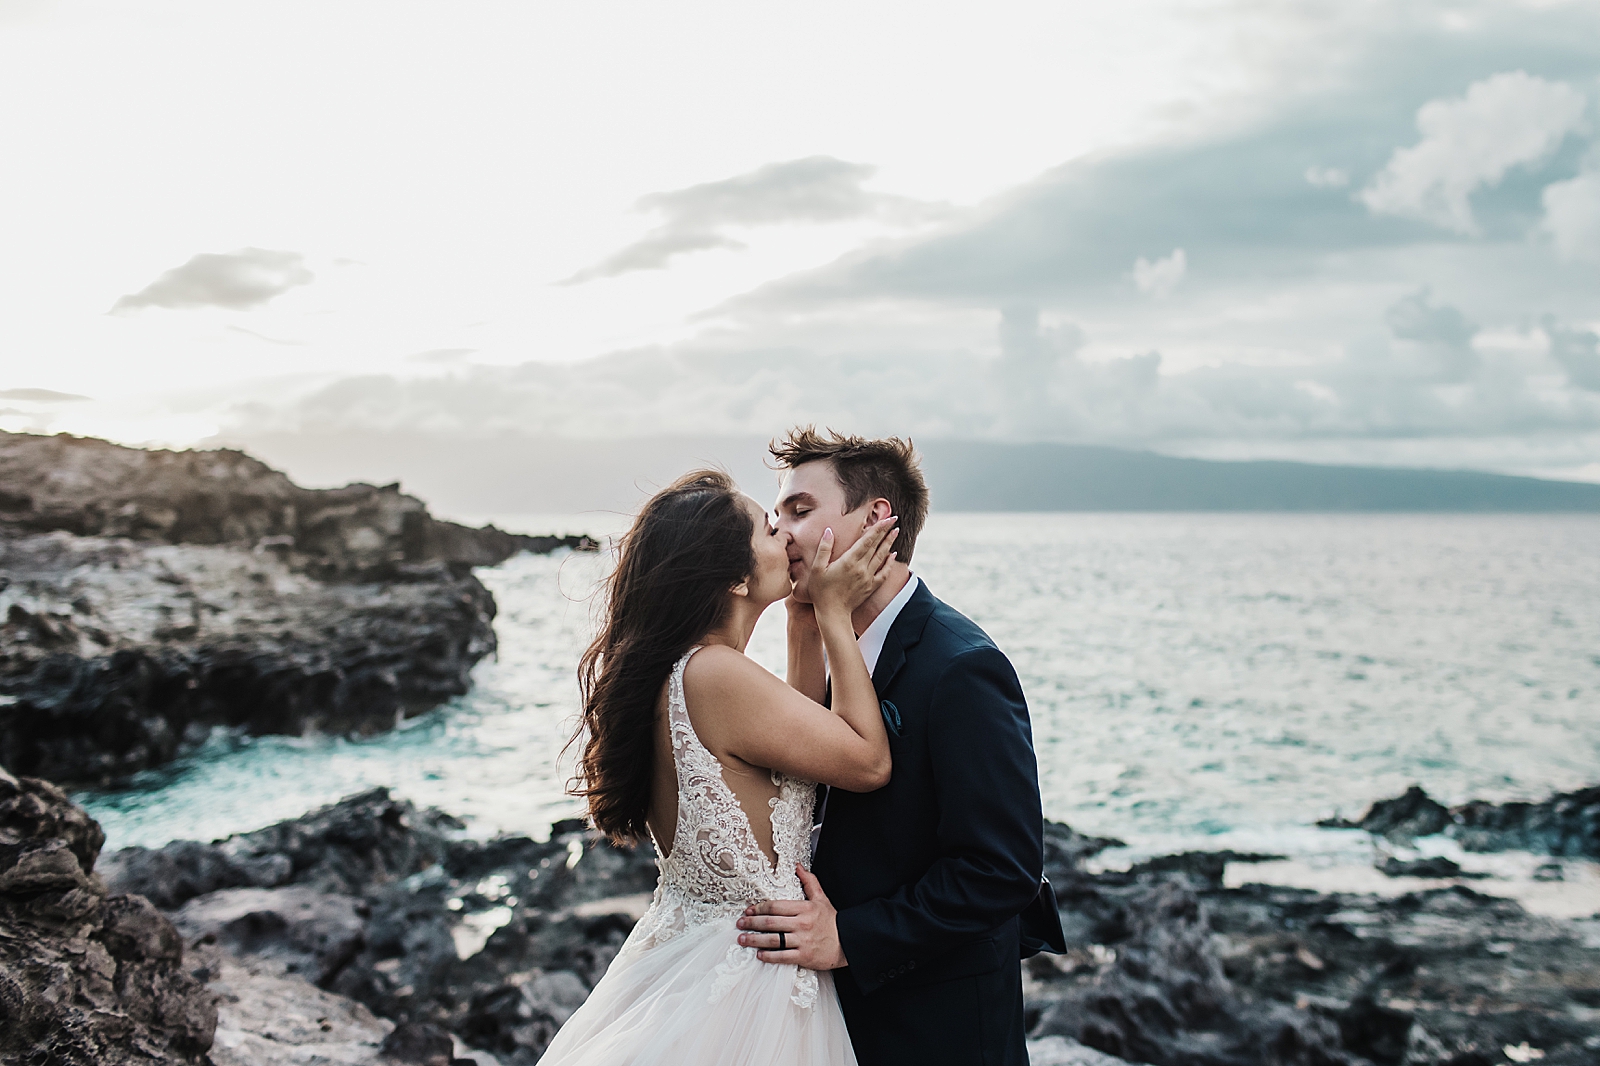 Bride holding Groom's face and kissing him on rocky ocean side